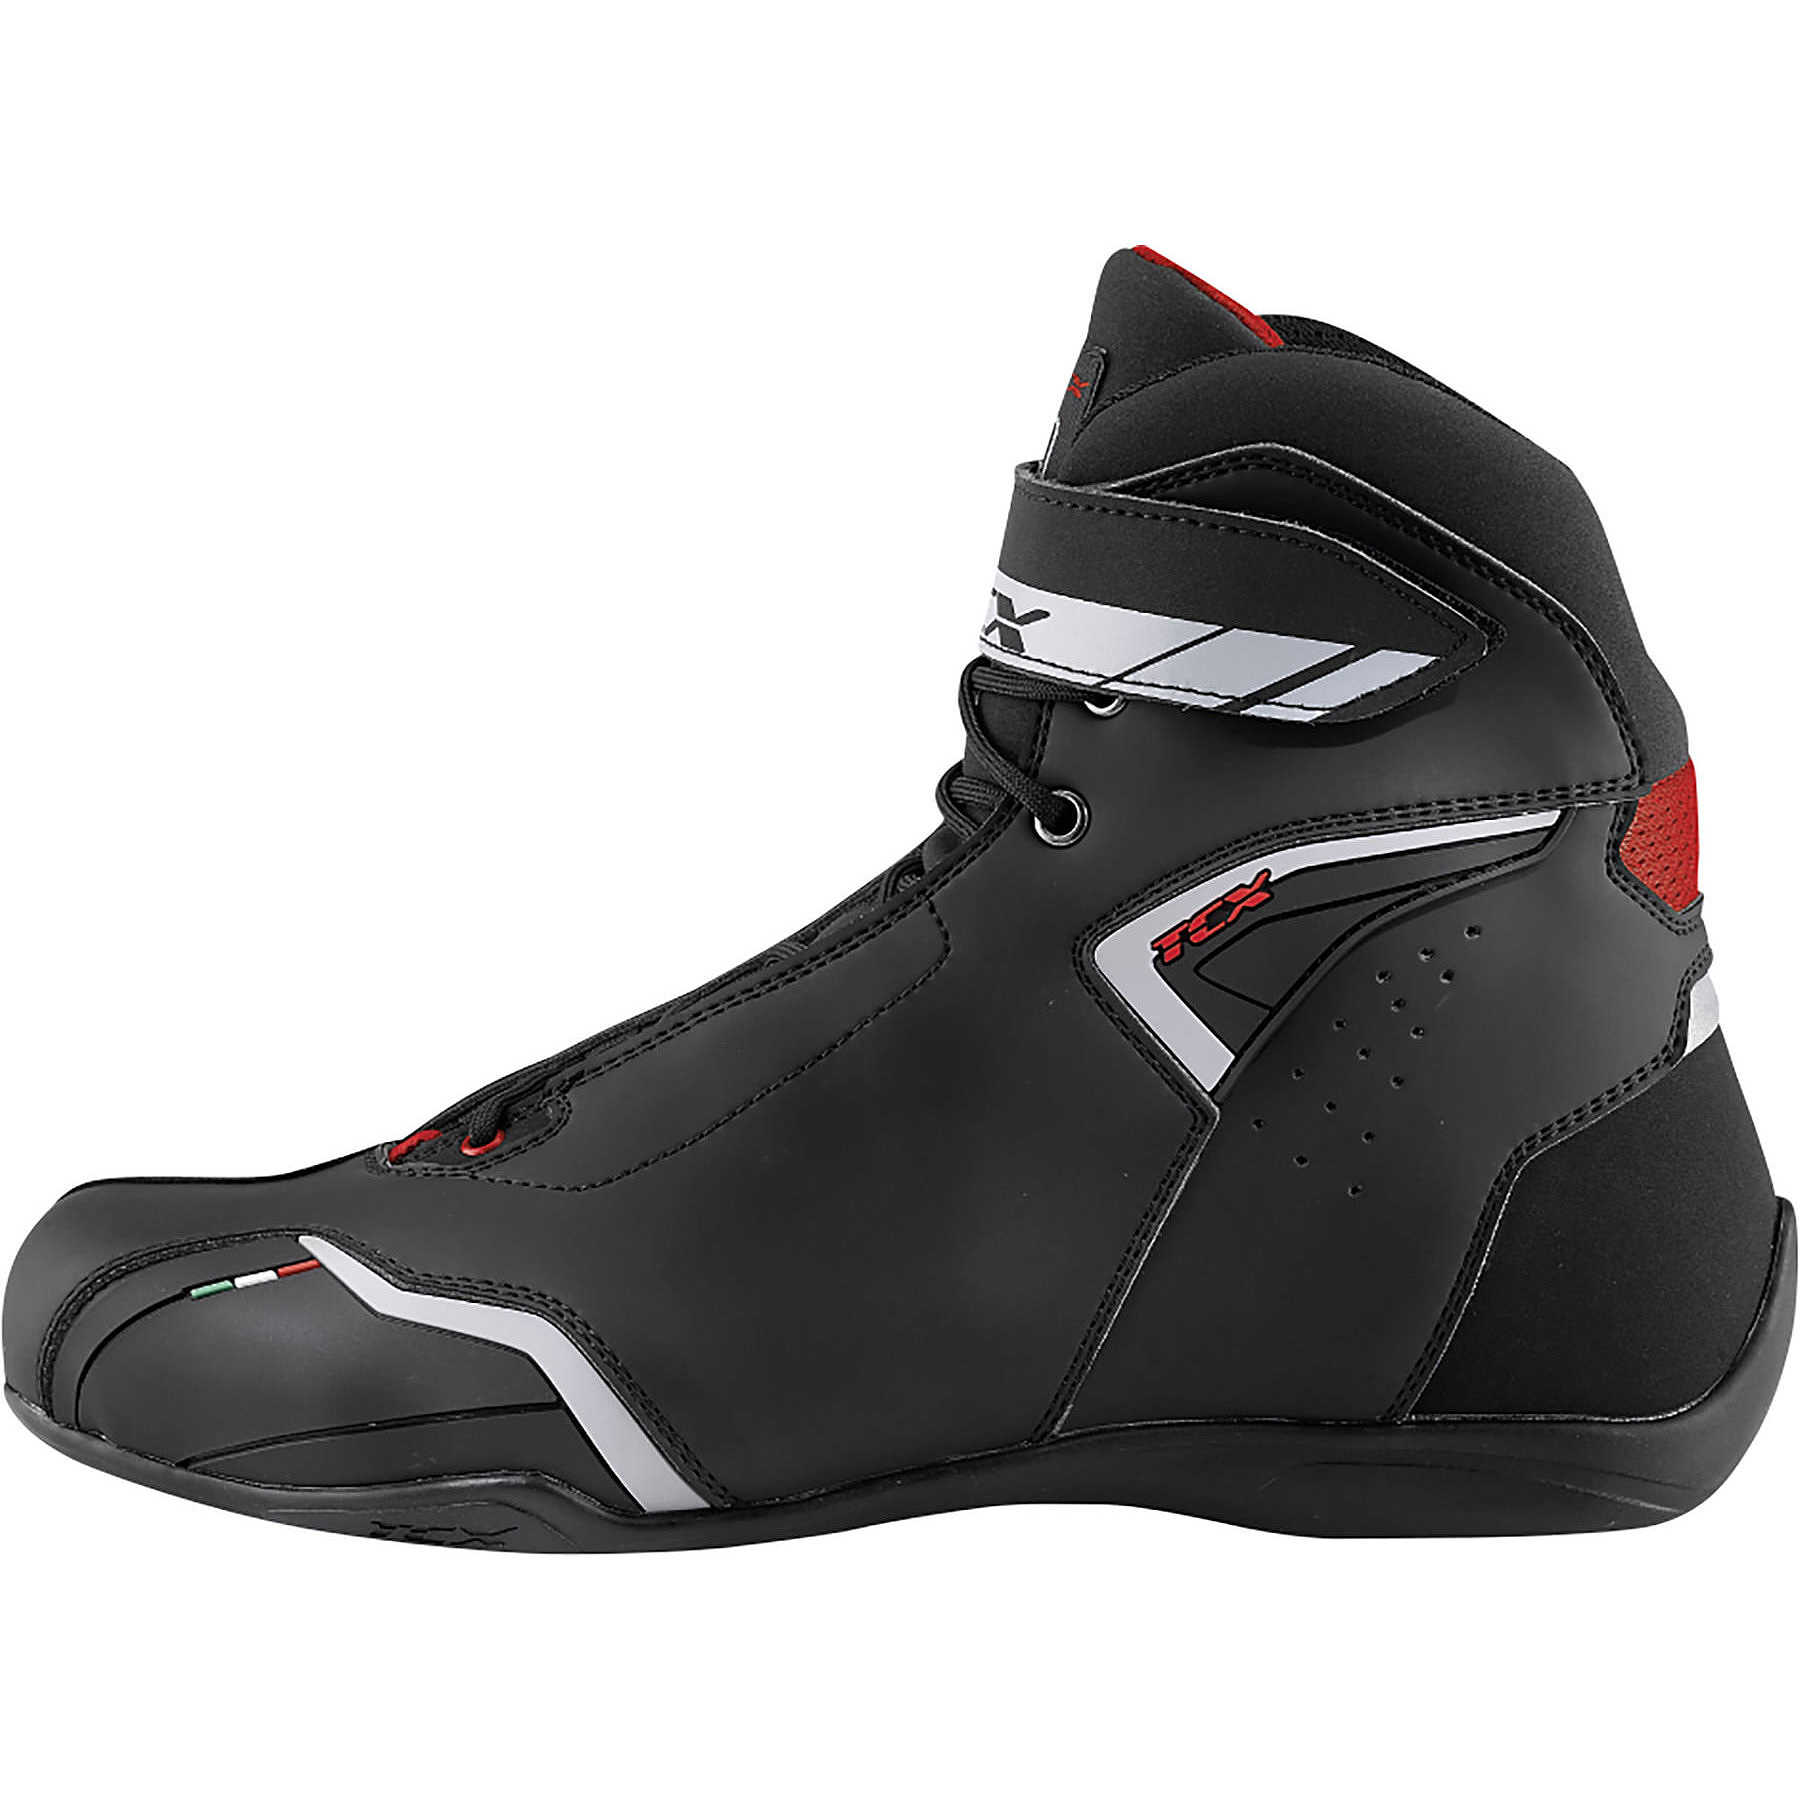 Chaussure moto taille 44 - TCX